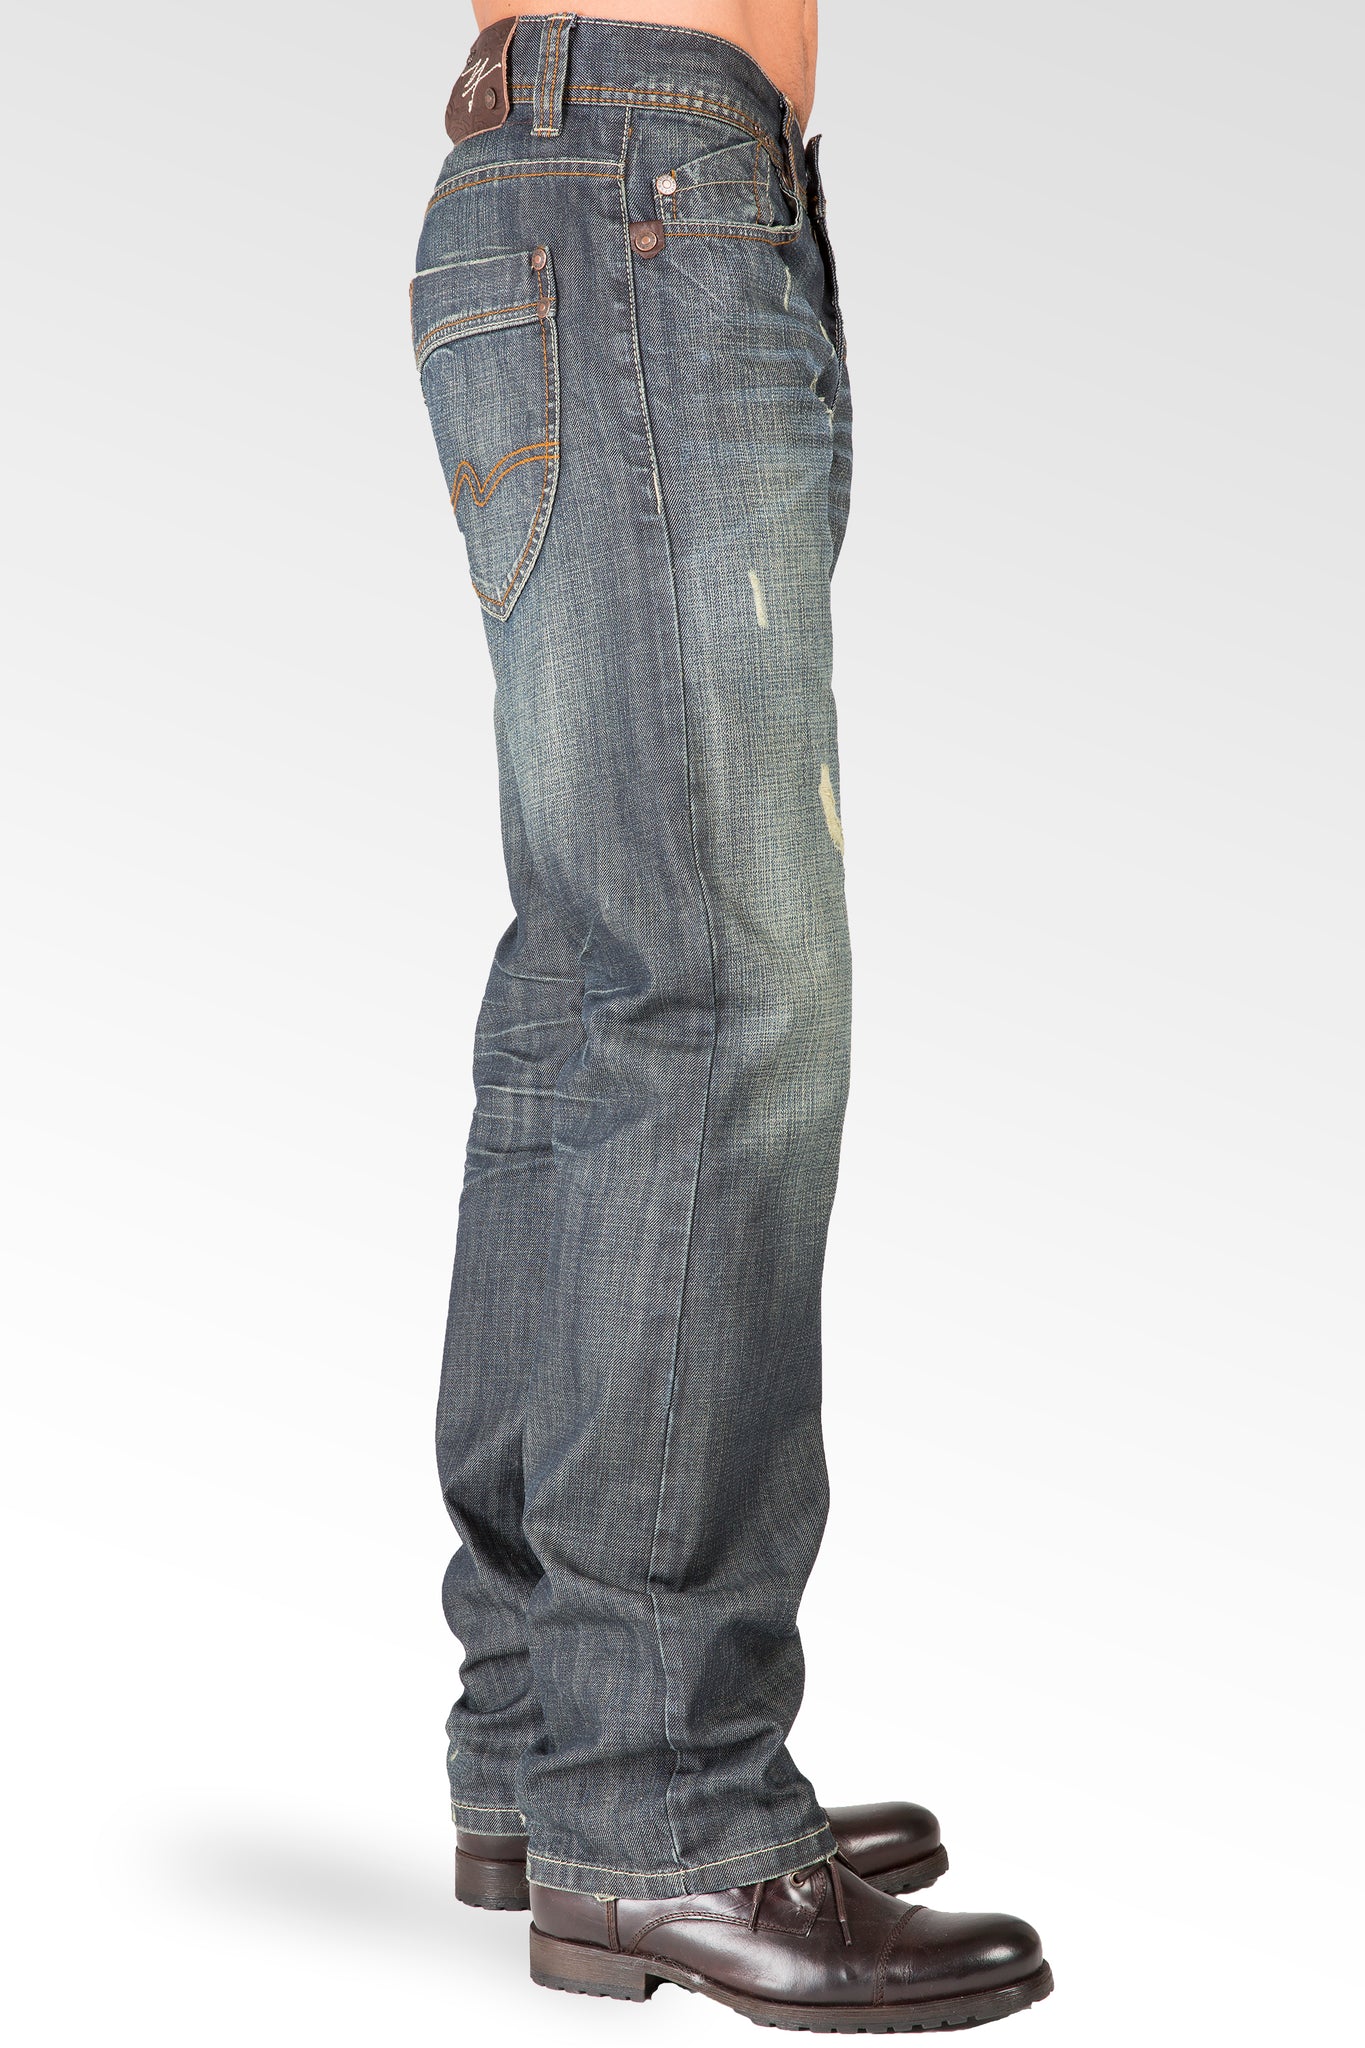 Relaxed Straight Vintage Premium Denim Distressed Signature 5 Pocket Jeans Whiskering